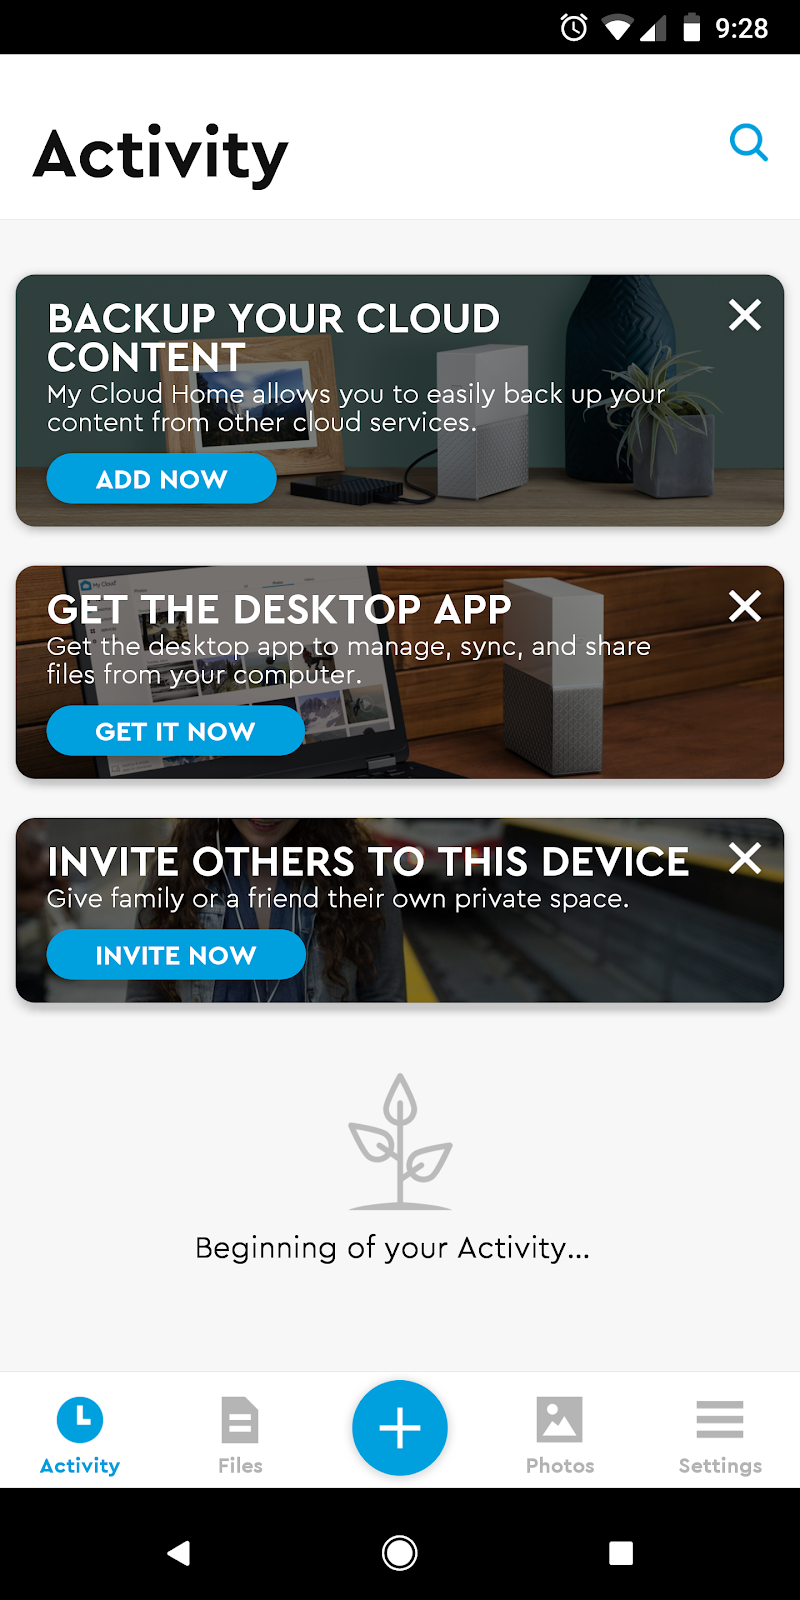 Starting on the My Cloud Home Mobile App